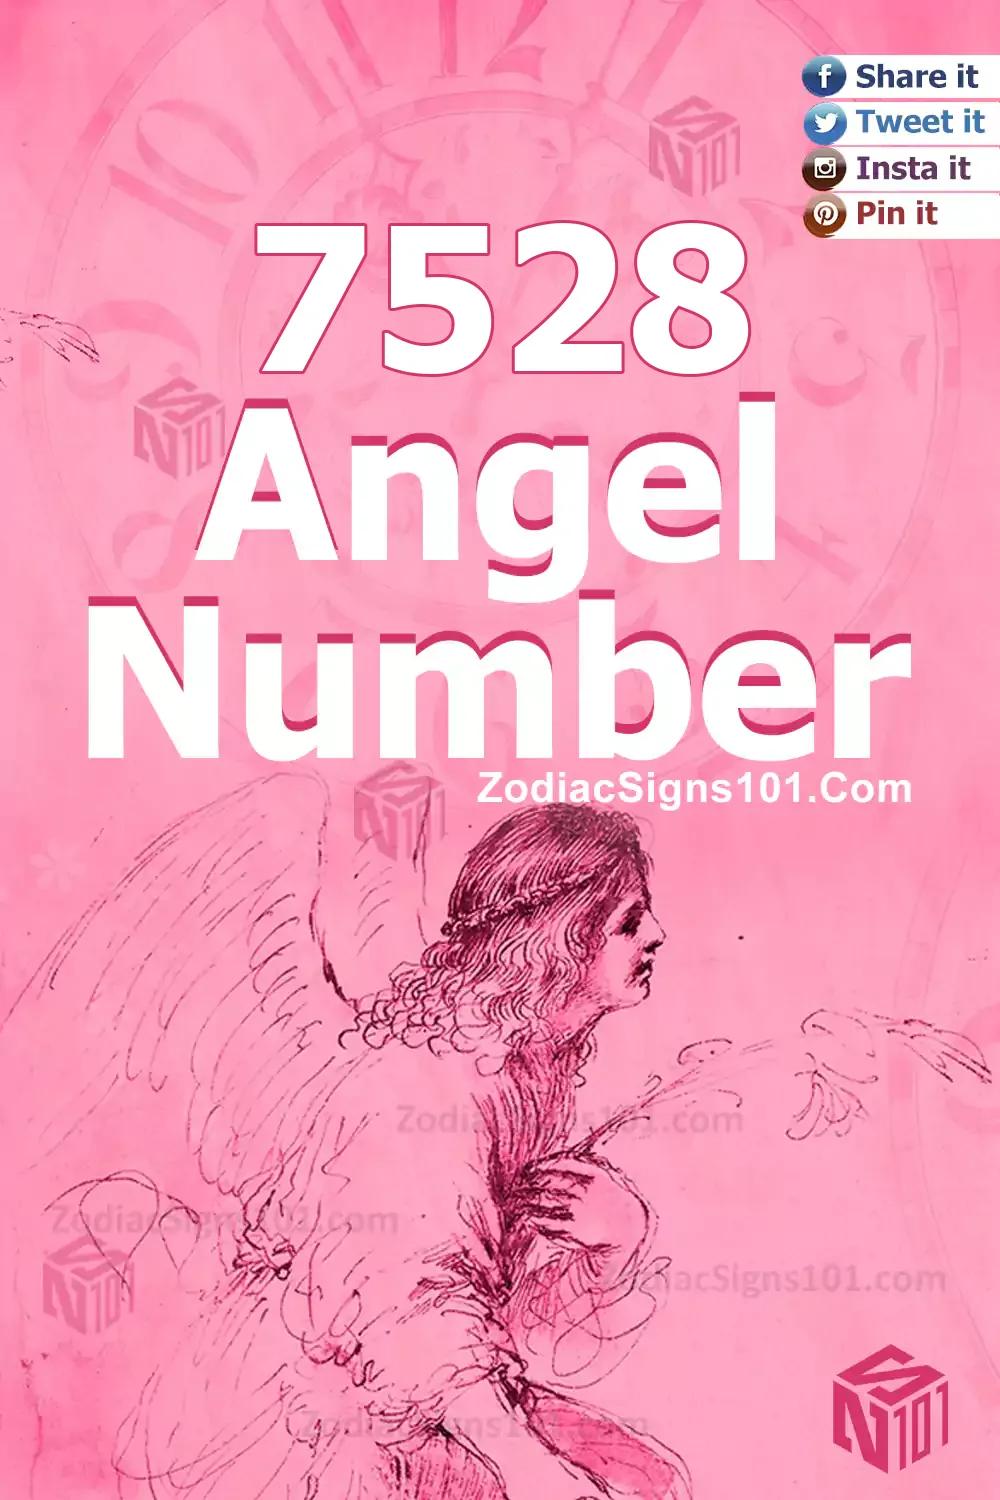 7528 Angel Number Meaning